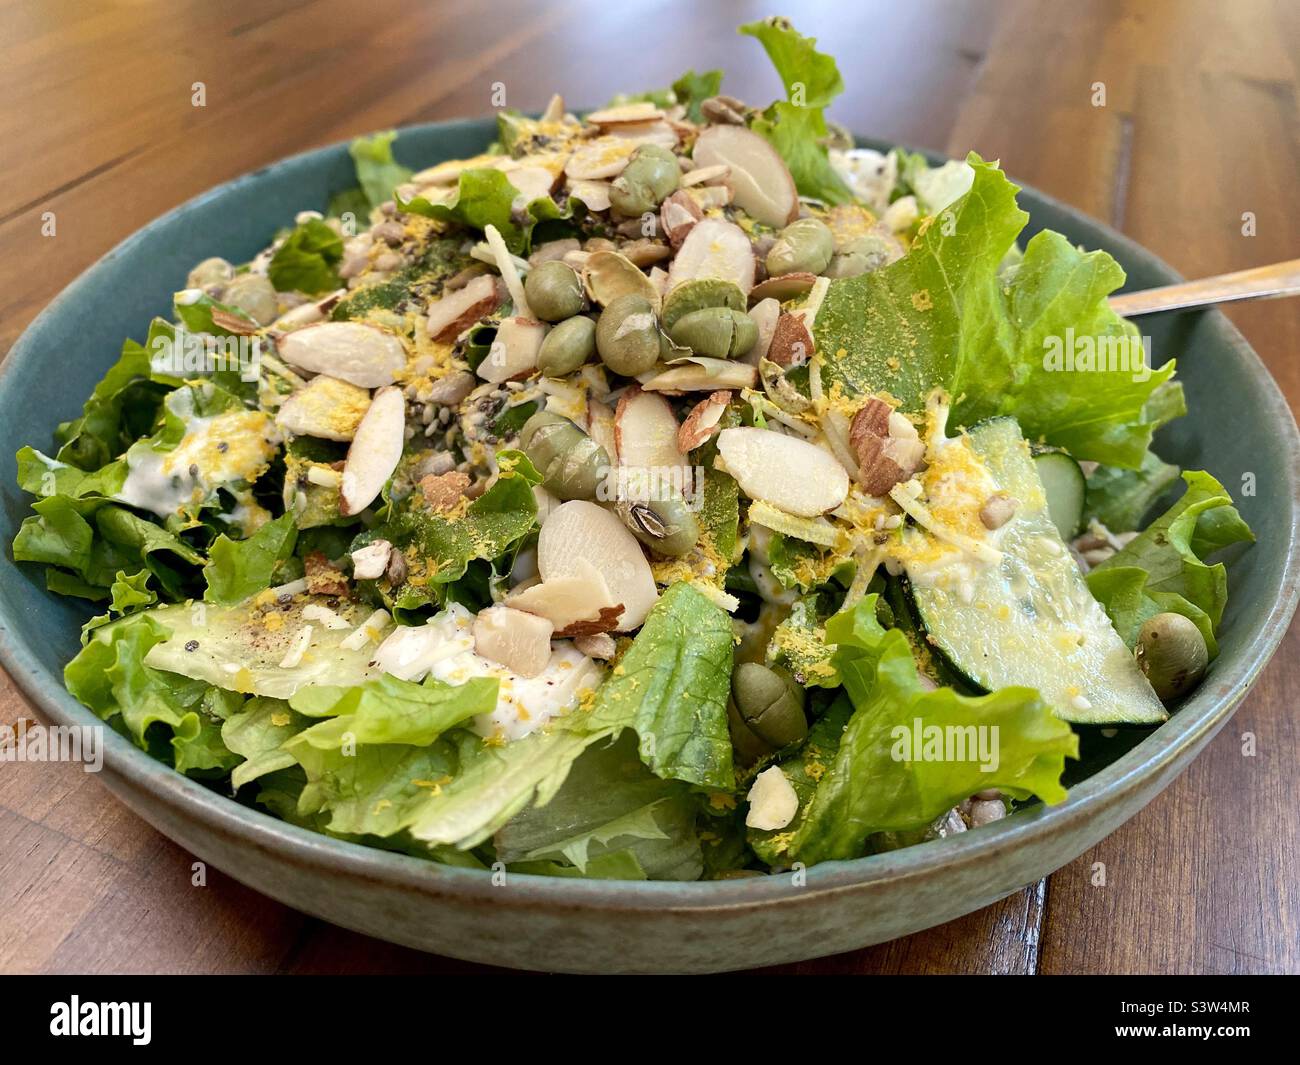 A salad with nuts, seeds, and dried edamame on top. Stock Photo